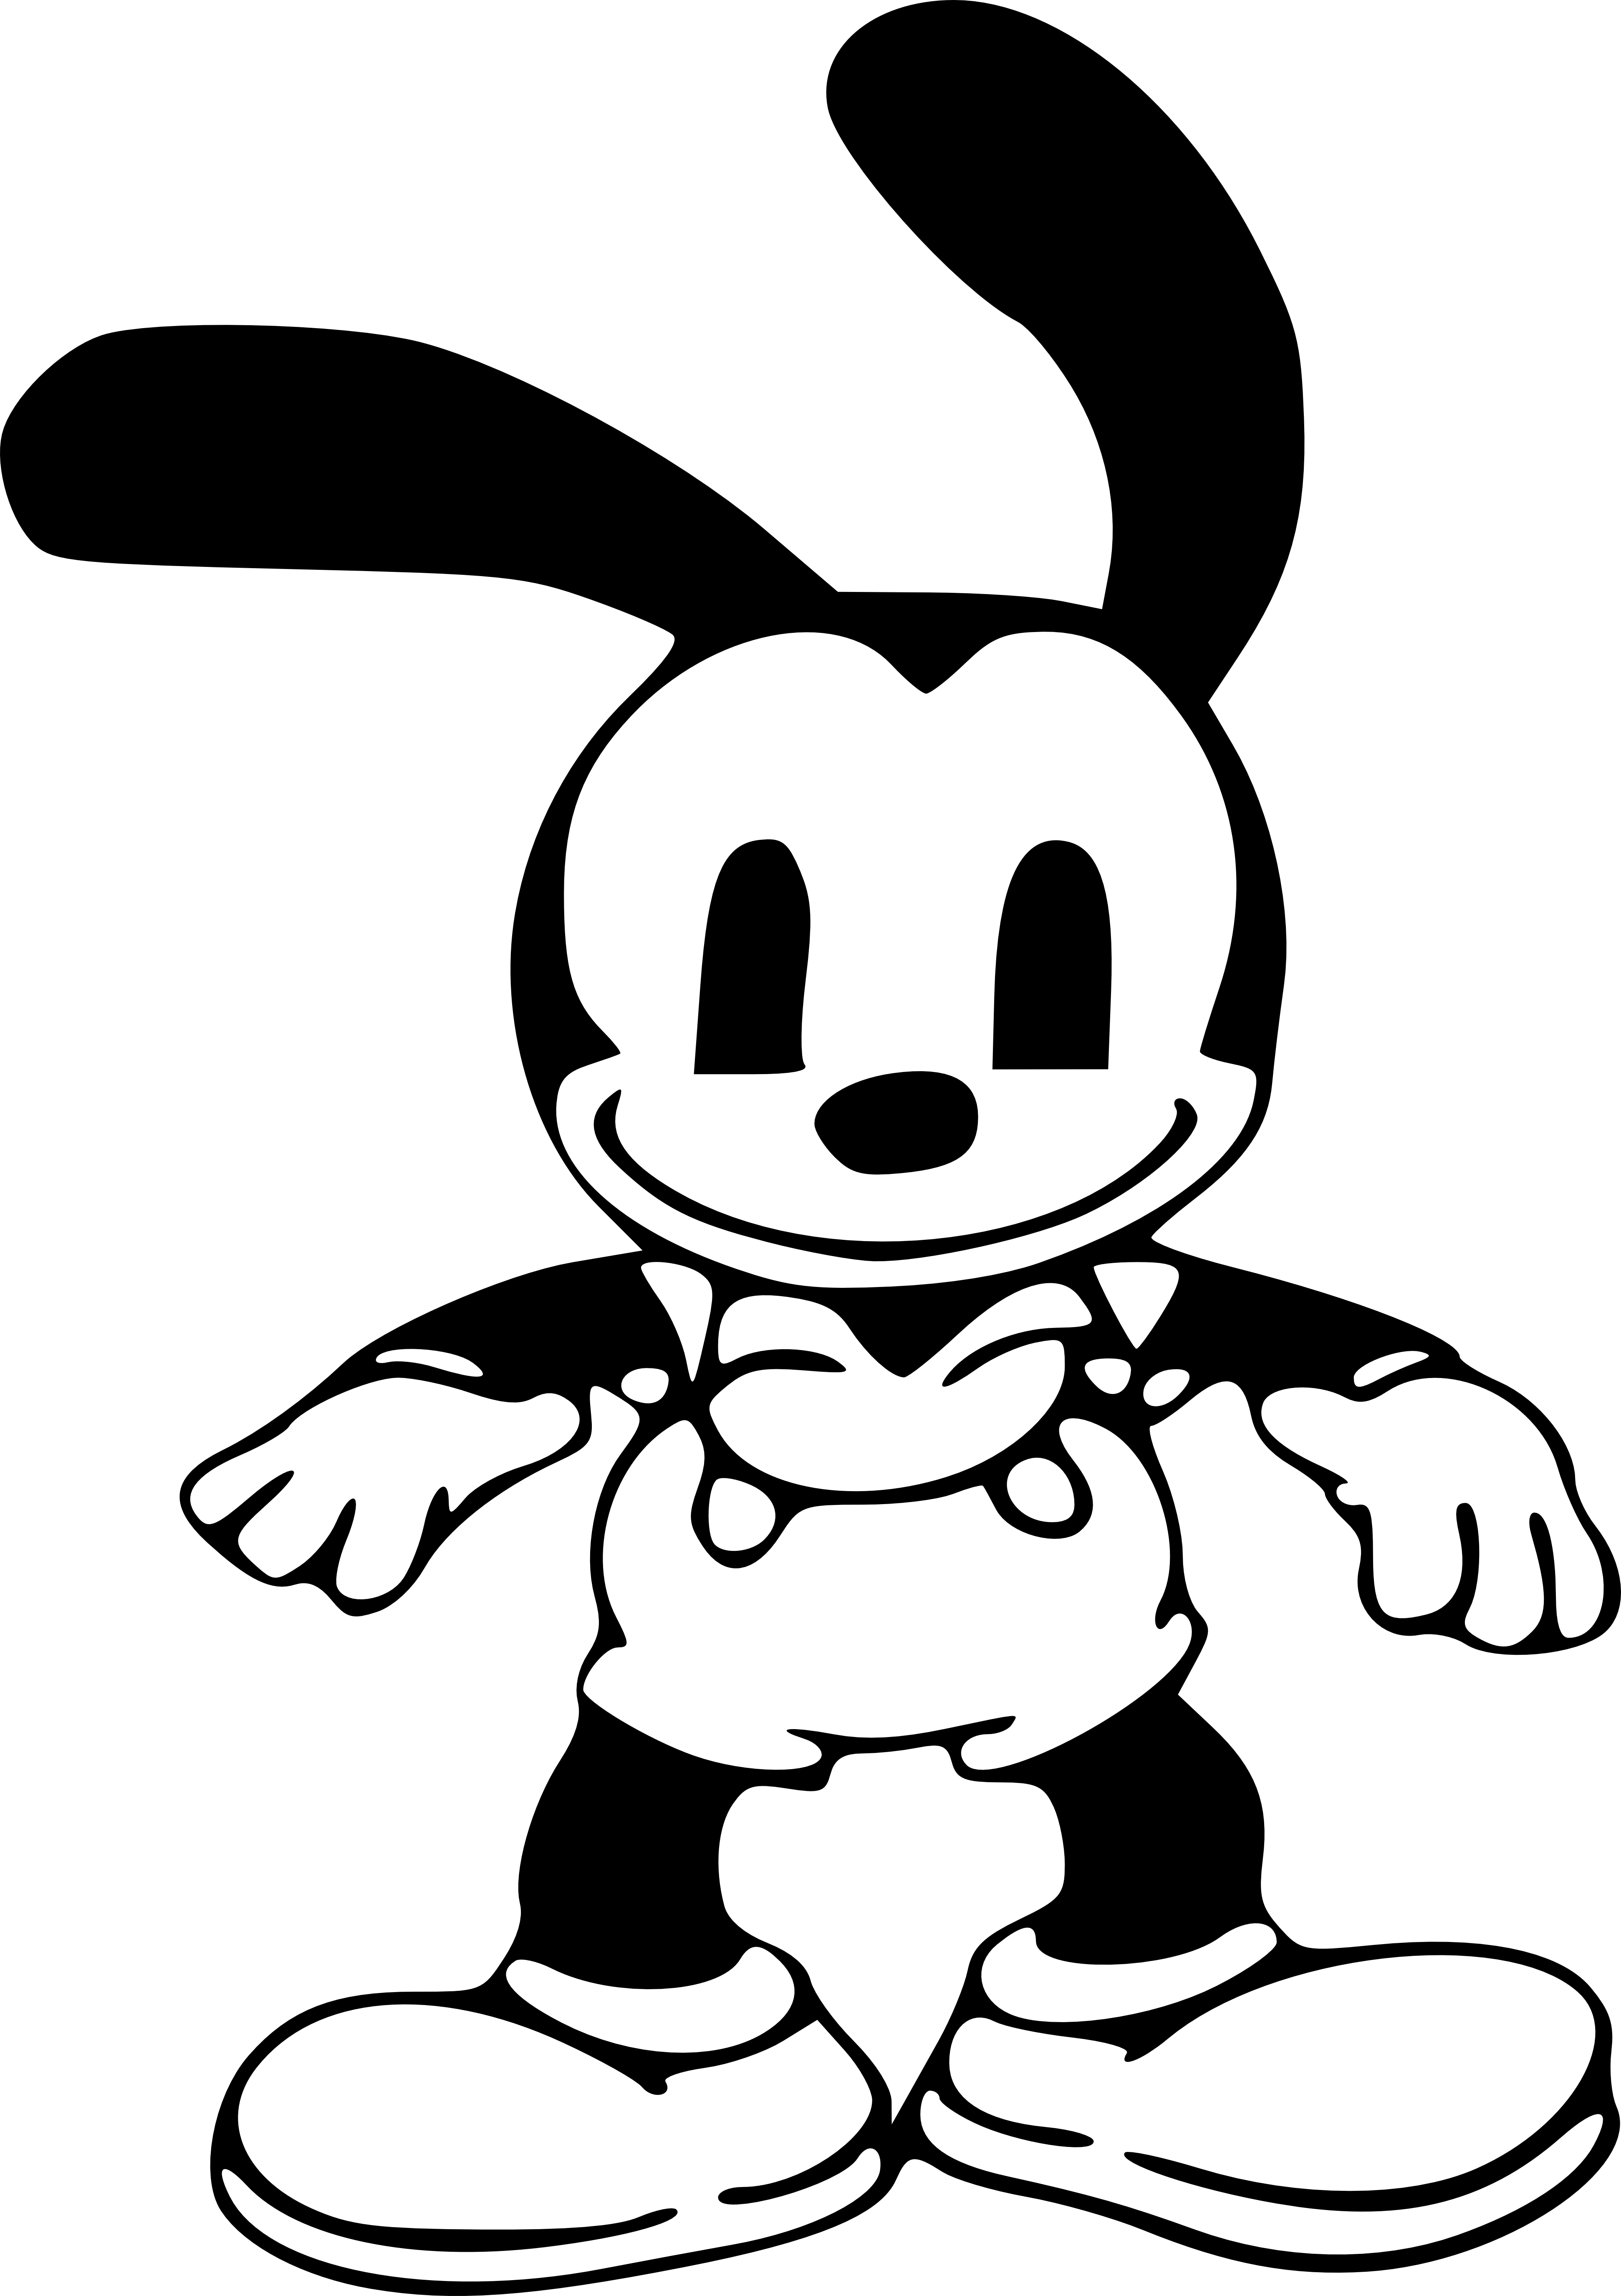 Oswald The Lucky Rabbit PNG Transparent Image